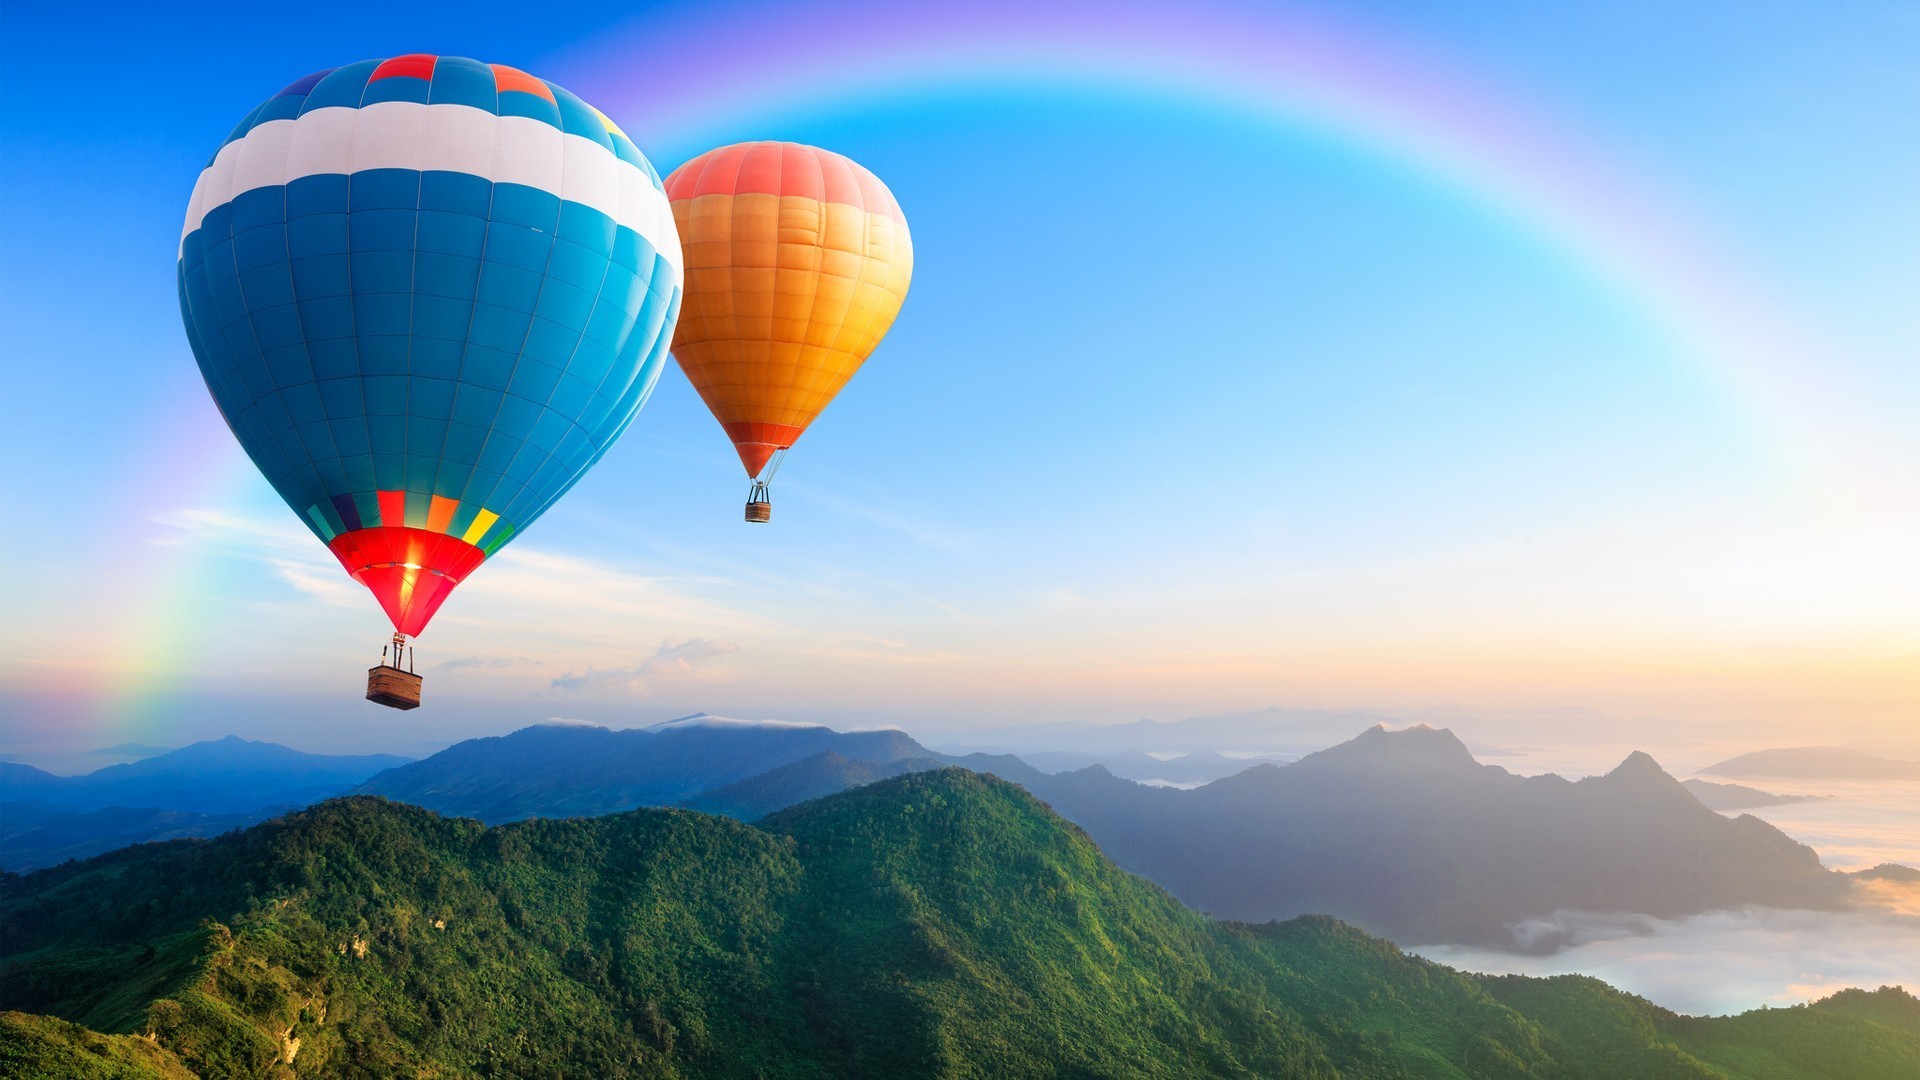 General 1920x1080 landscape hot air balloons mountains rainbows skyscape vehicle nature outdoors